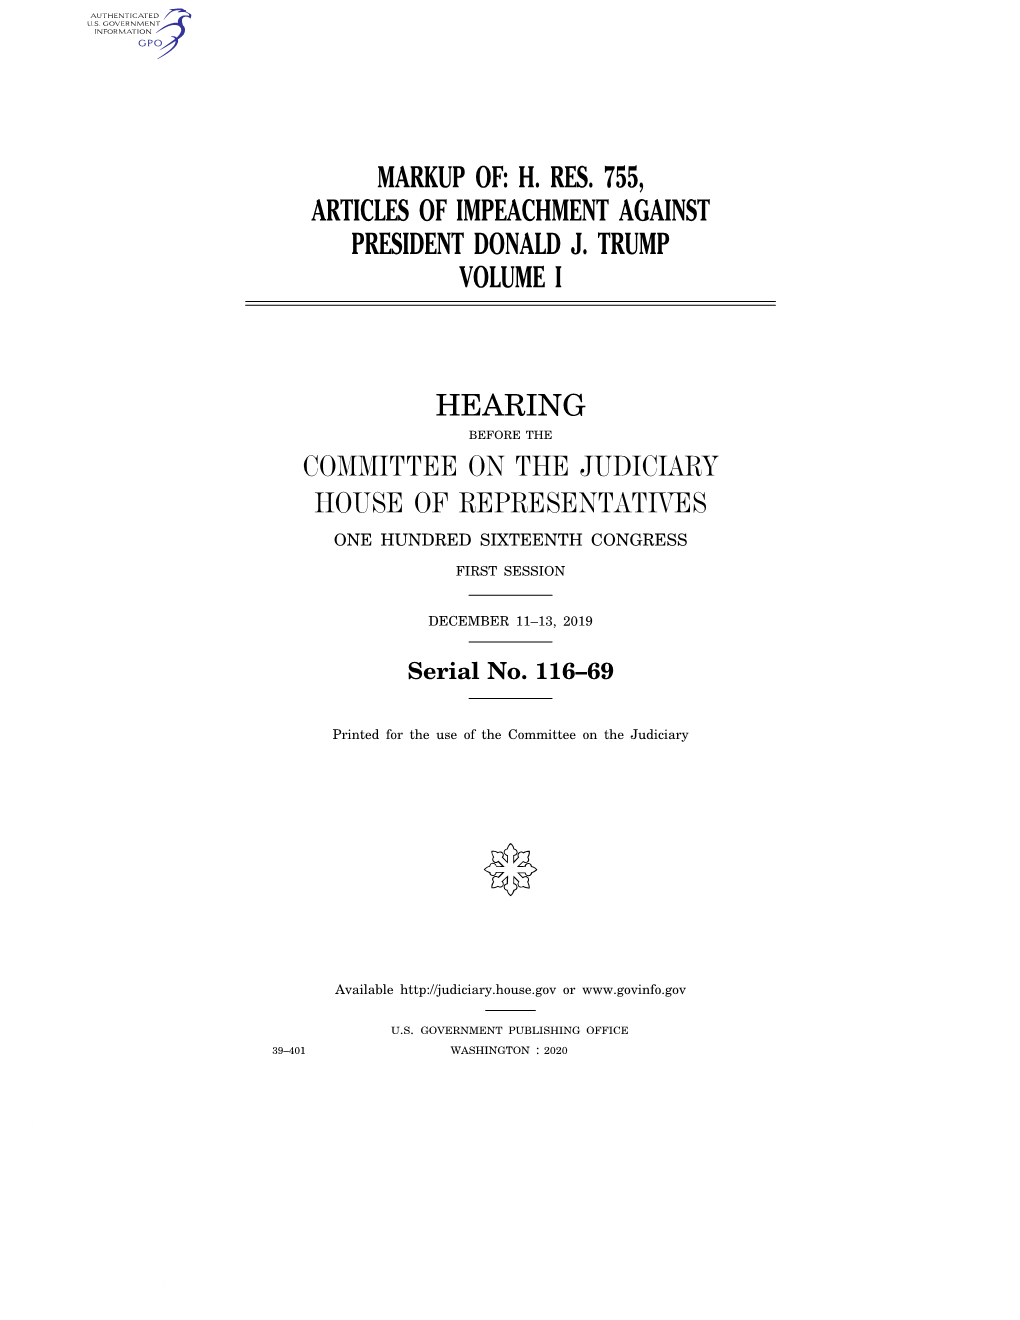 H. Res. 755, Articles of Impeachment Against President Donald J